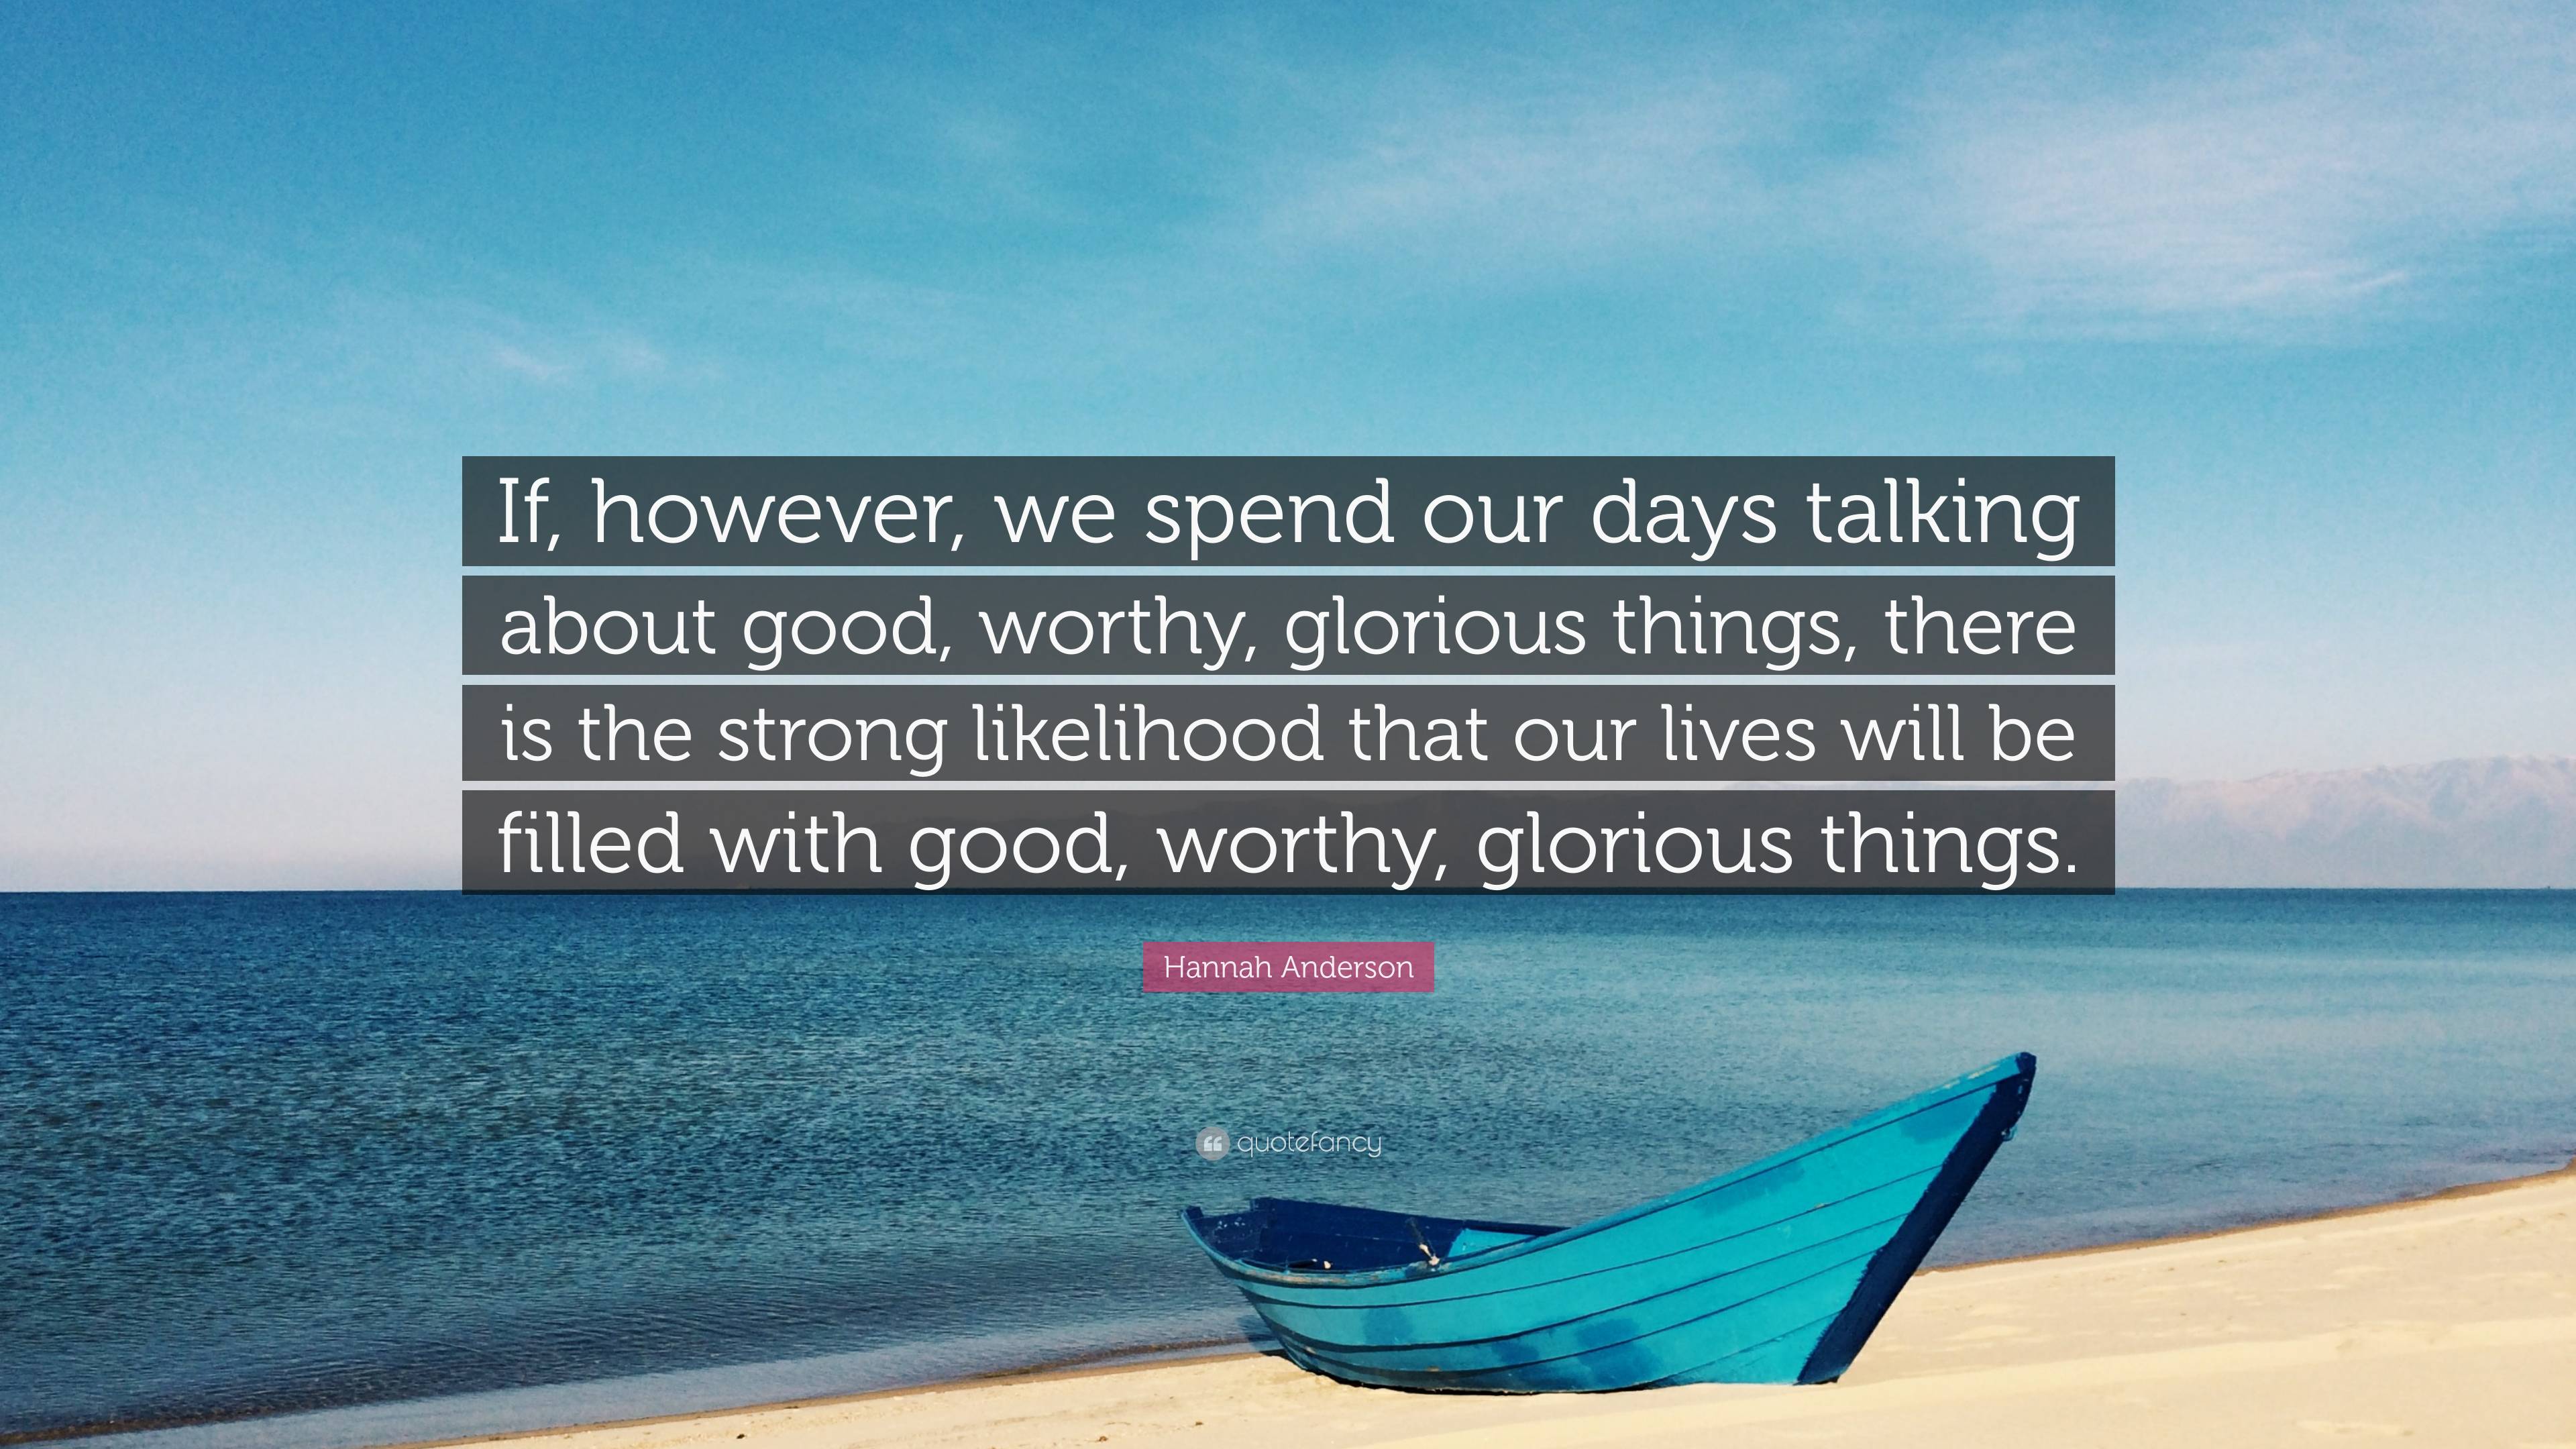 https://quotefancy.com/media/wallpaper/3840x2160/7244354-Hannah-Anderson-Quote-If-however-we-spend-our-days-talking-about.jpg